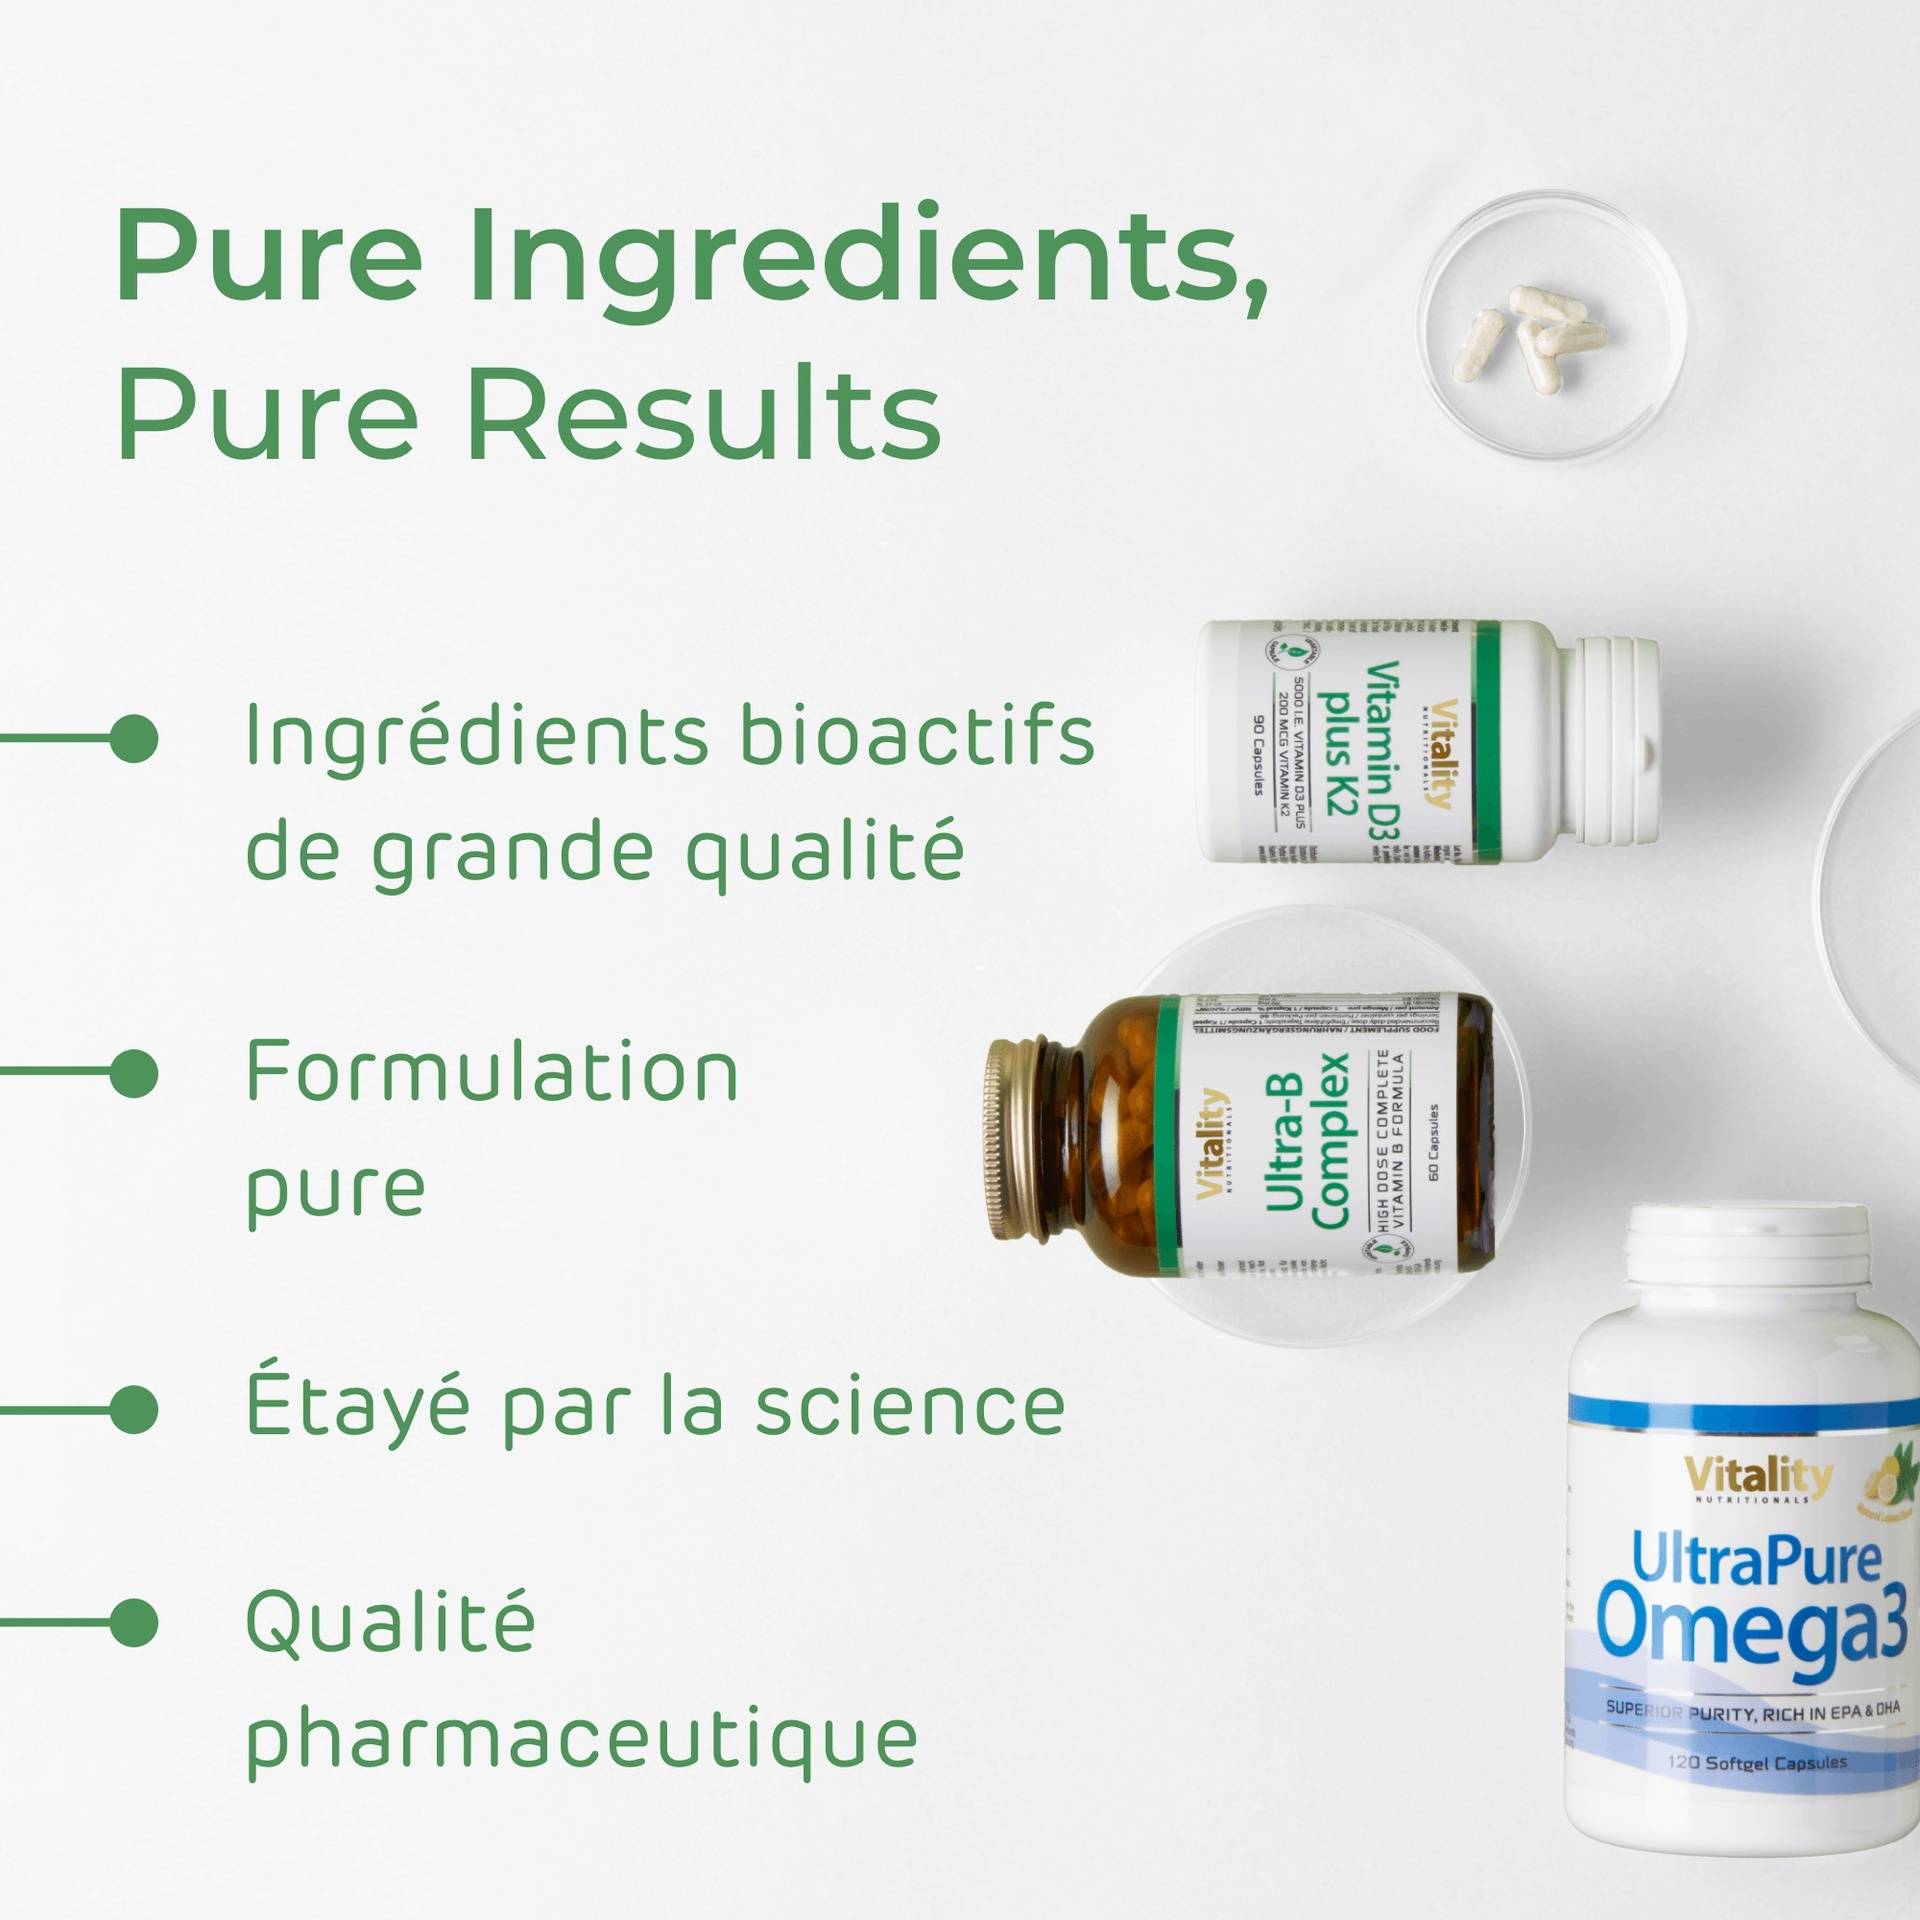 2000x2000_Pure Ingredients,Pure Results_clean_FR (2).png